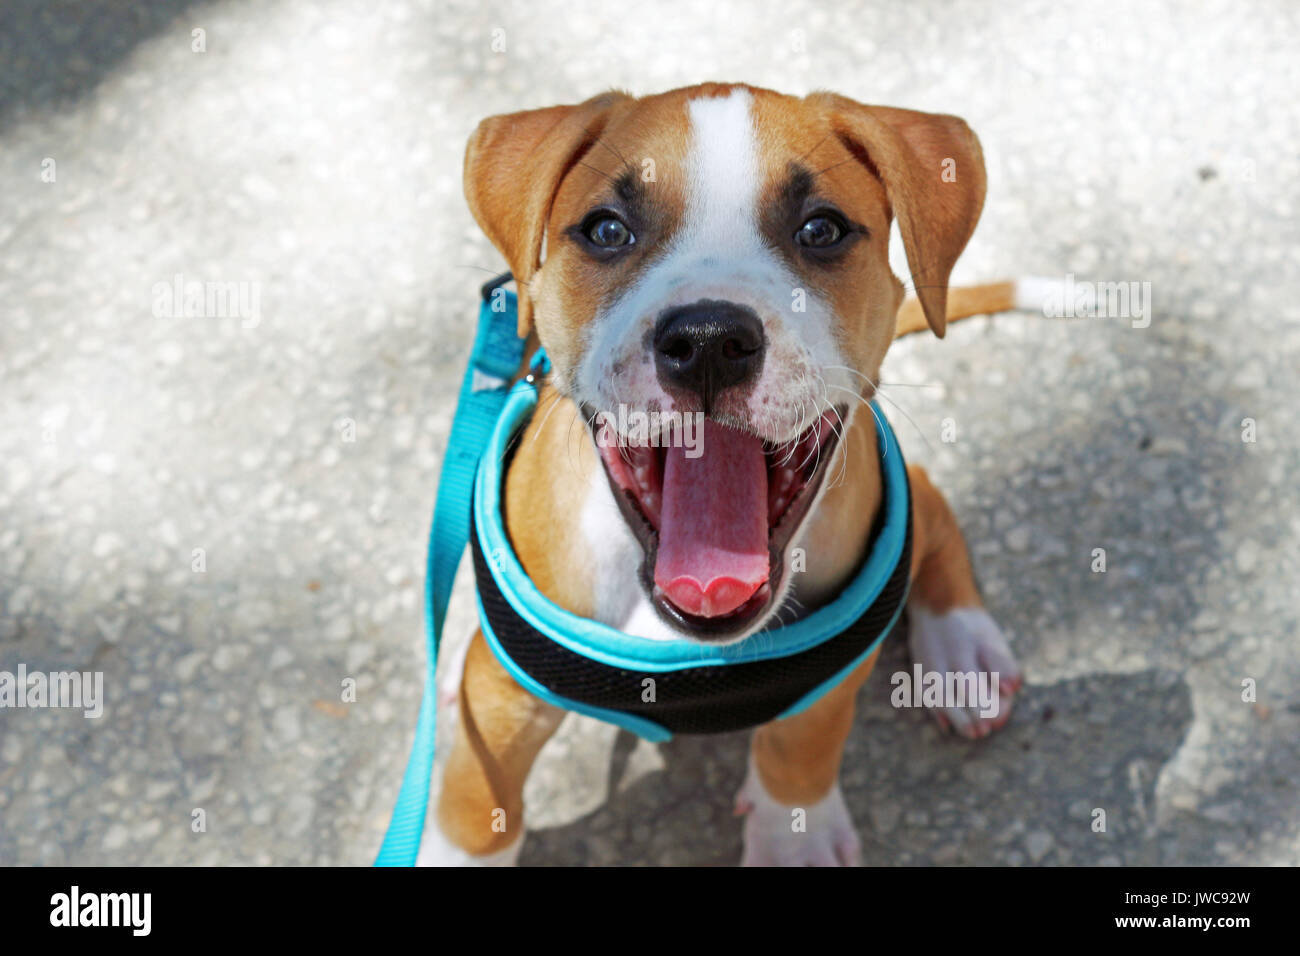 A Very Young Pit Bull Puppy with a Blue Leash and Harness On his First Walk Being Trained. Stock Photo